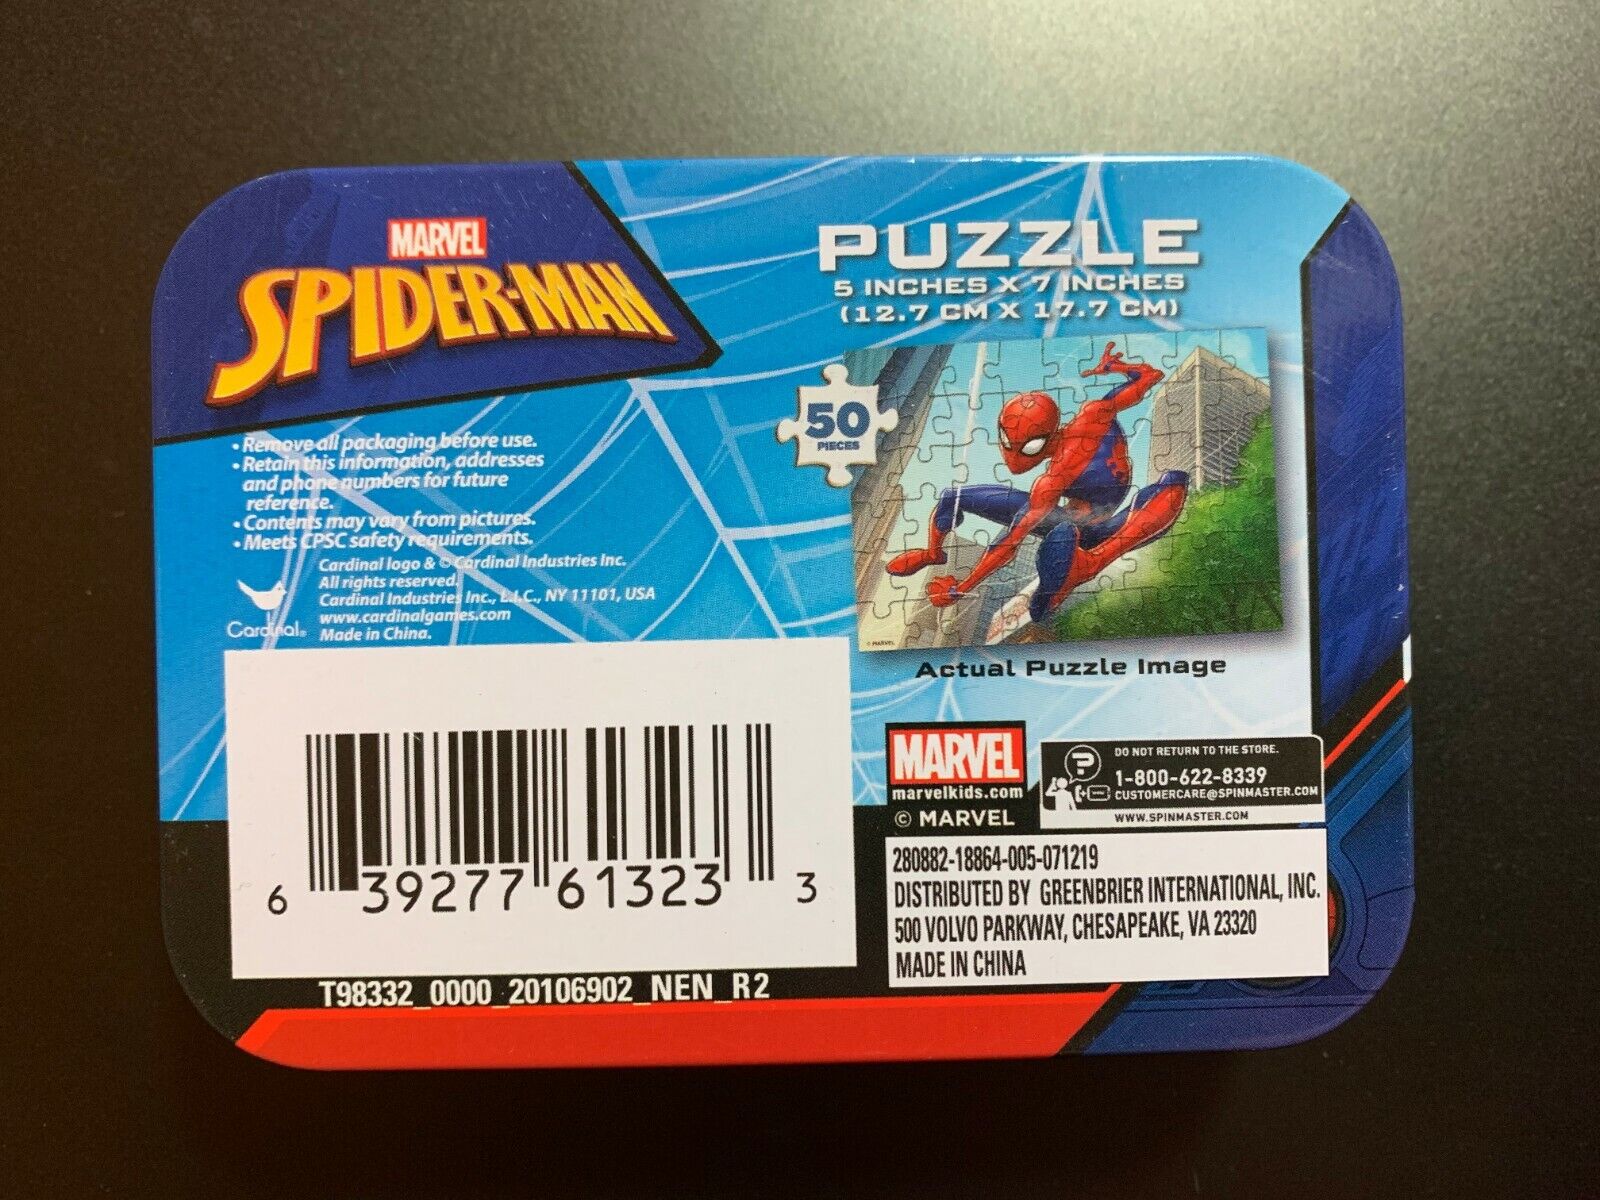 MARVEL SPIDER-MAN PUZZLE 50 PIECES IN TIN BOX BRAND NEW 5